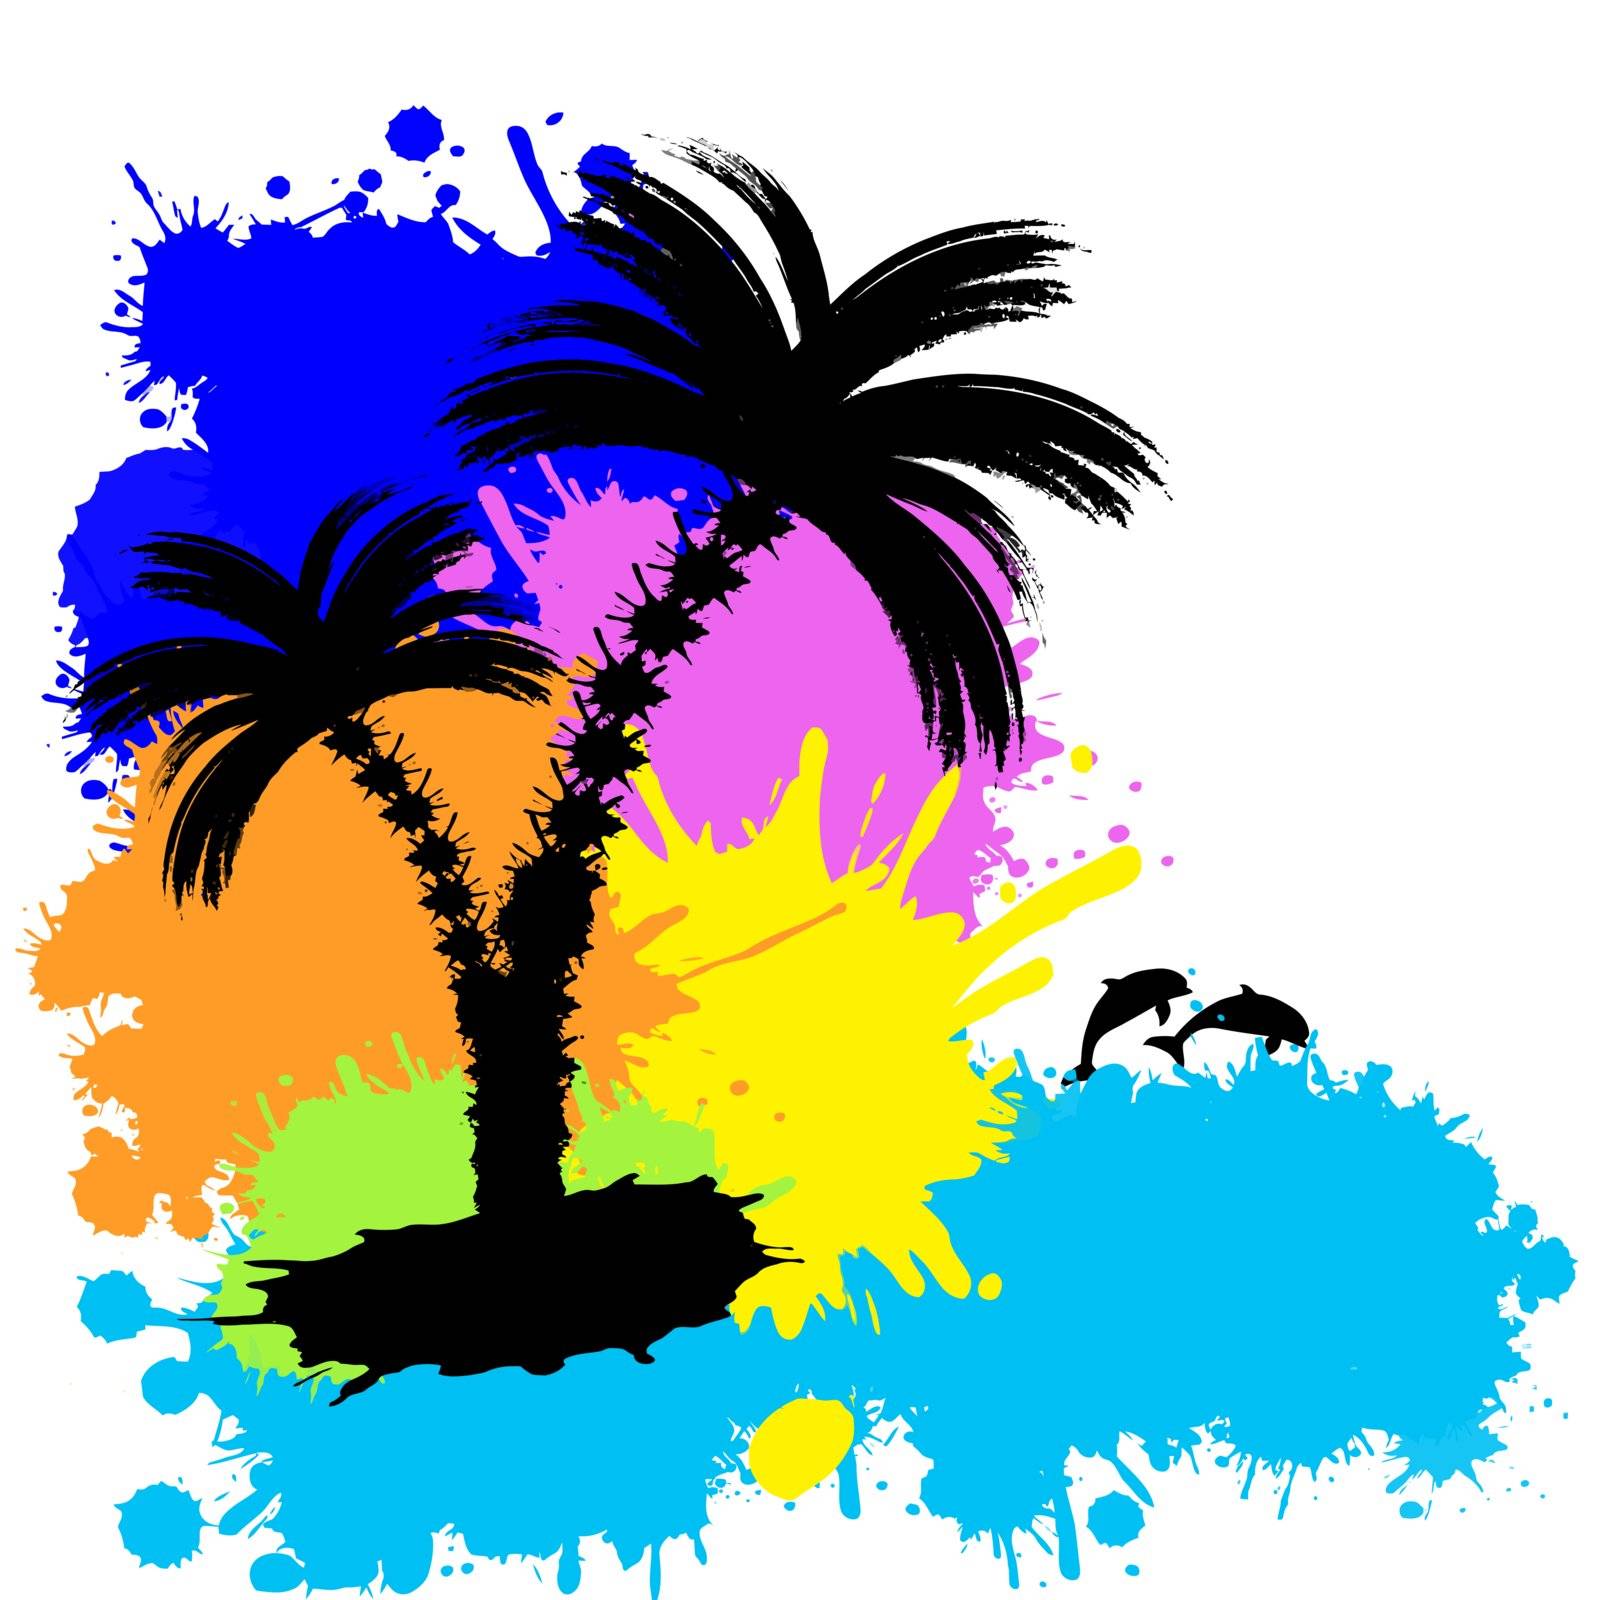 Tropical background with palms made from colored splatters, vector illustration